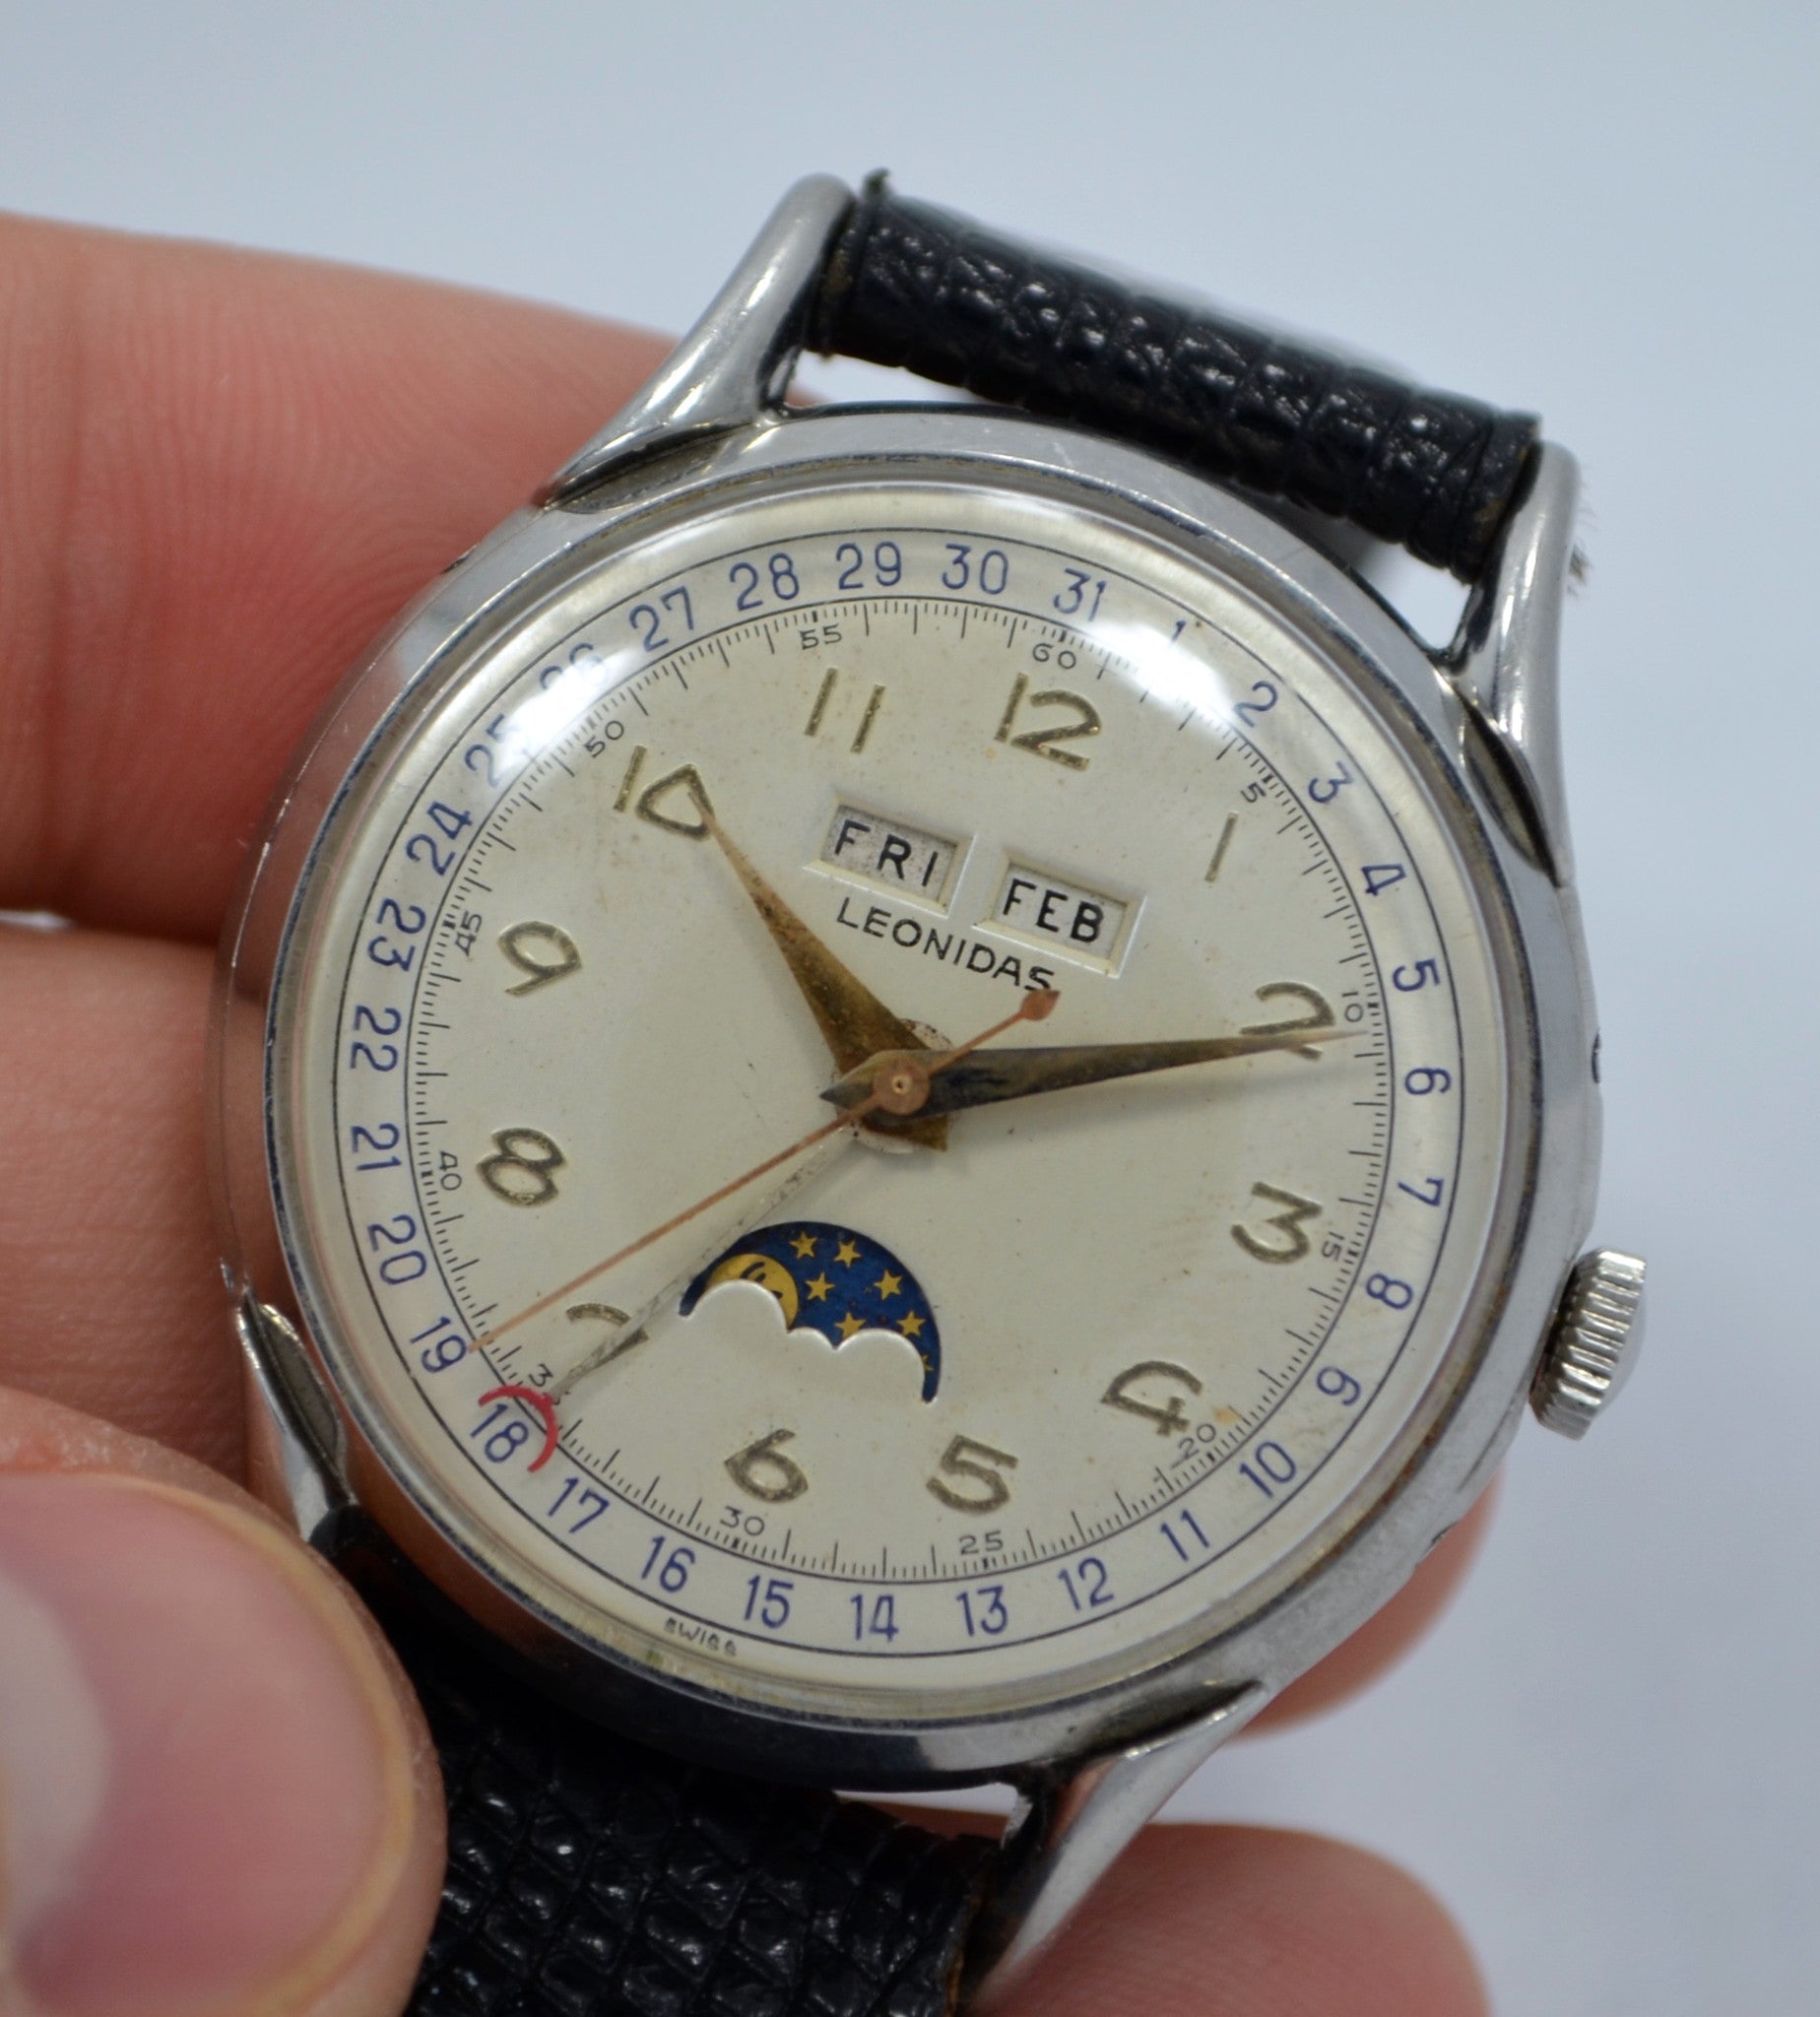 Vintage Leonidas Triple Date Calendar Moon Phase Day Date Steel Ref. 1201 Manual Wind 1940's - Hashtag Watch Company